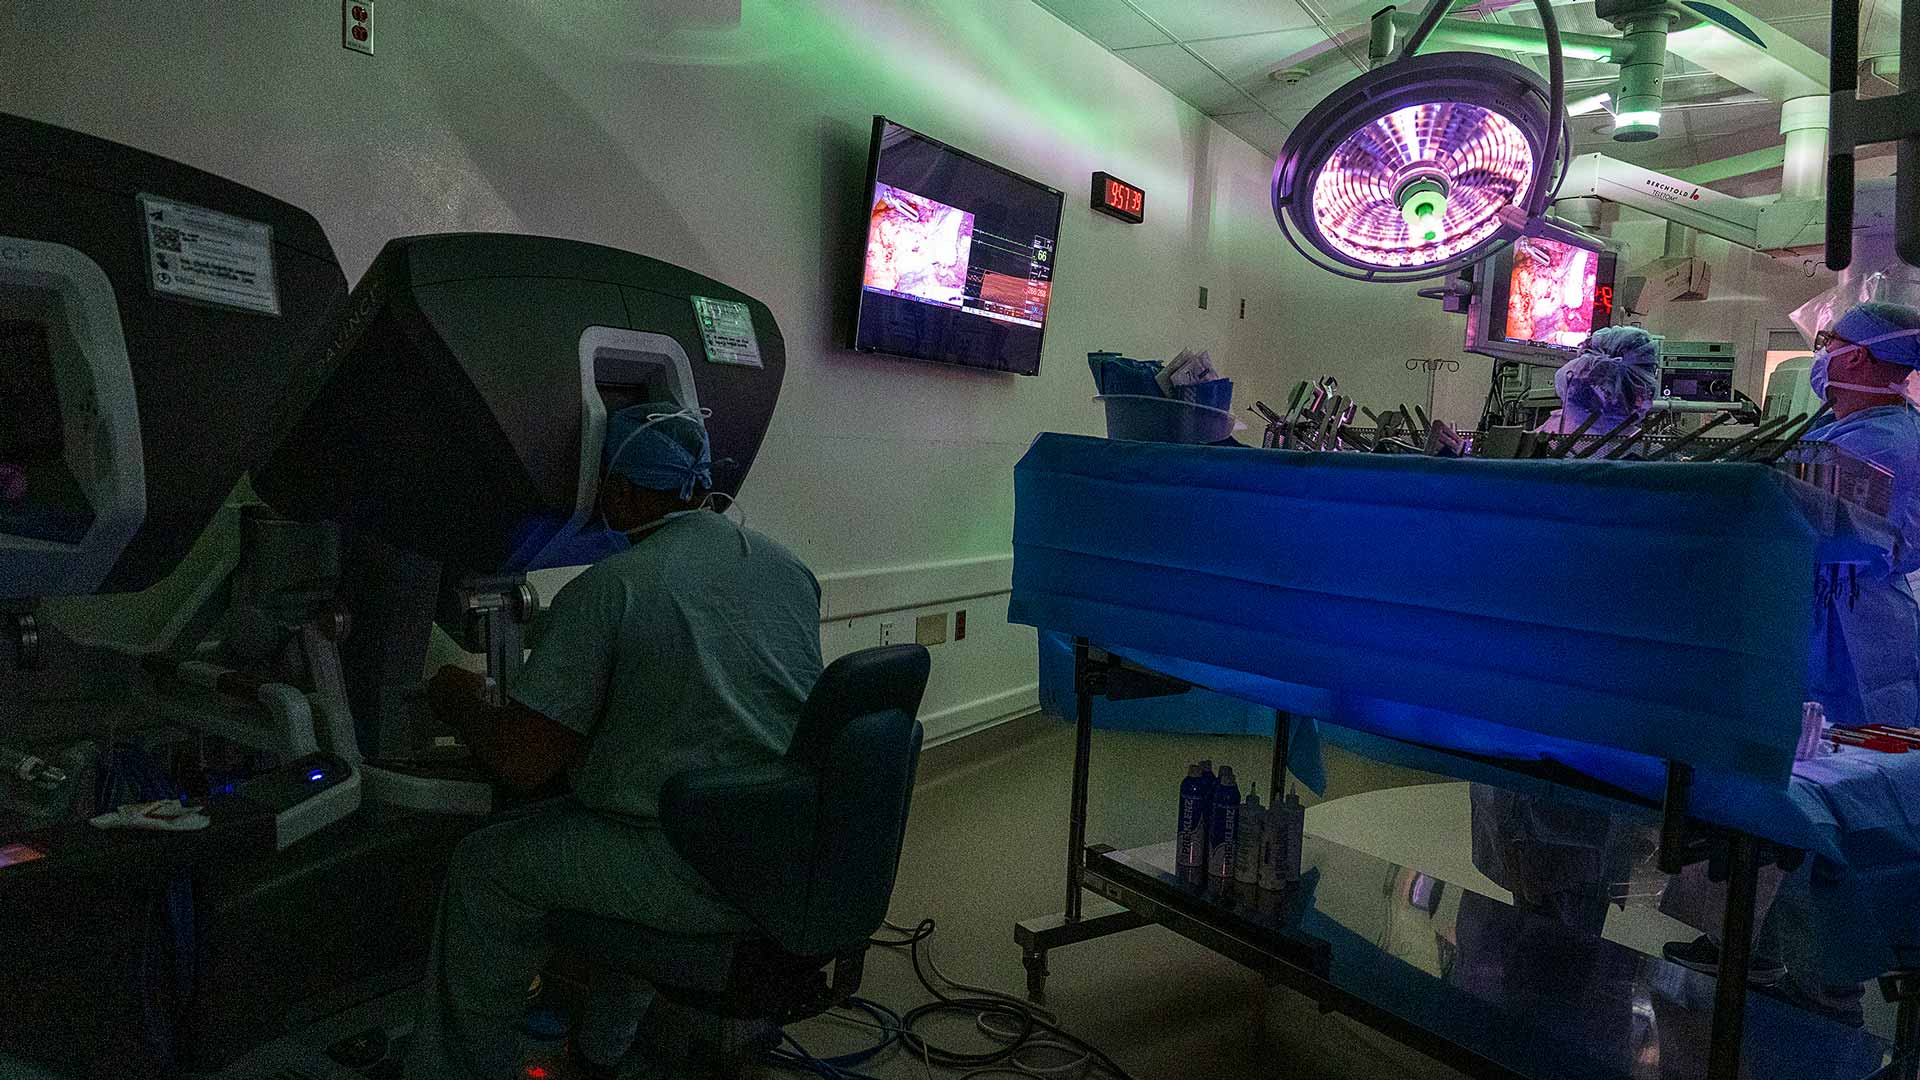 Operating room setup with dimmed lights